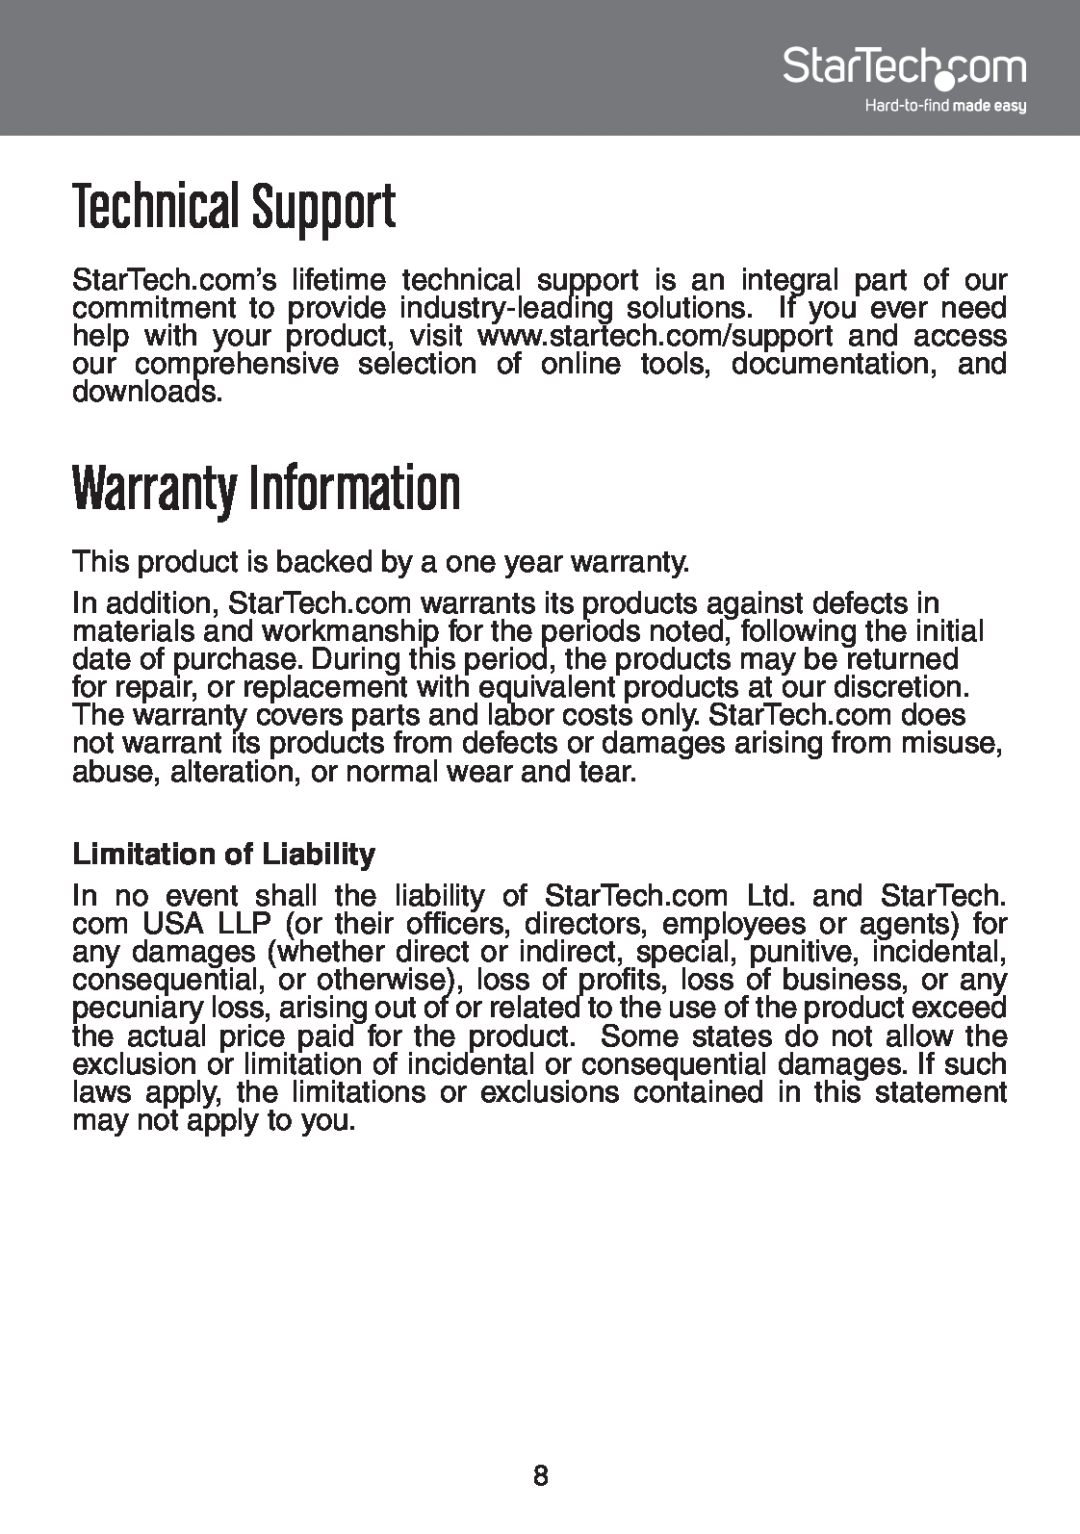 StarTech.com SV231UAF Technical Support, Warranty Information, This product is backed by a one year warranty 